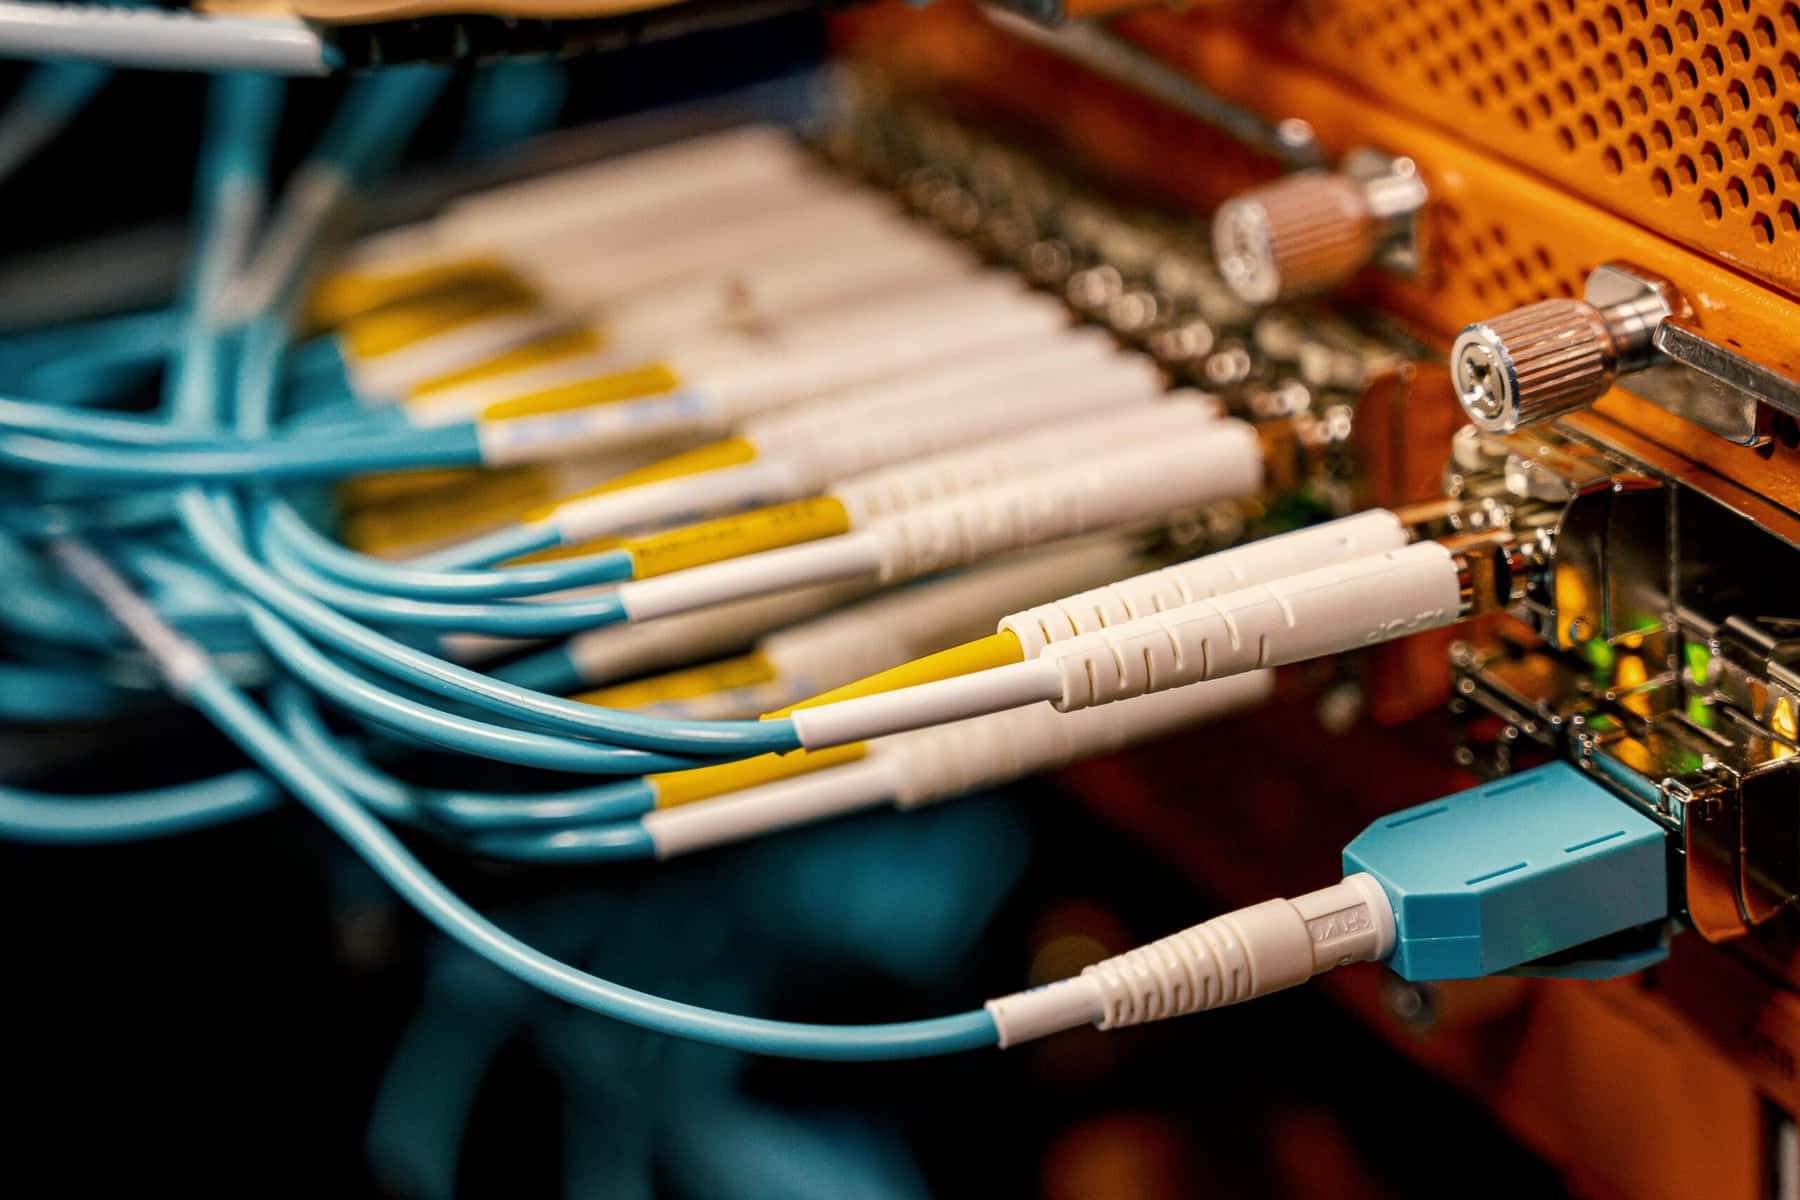 Fiber optic cabling being installed in a server room at an office.